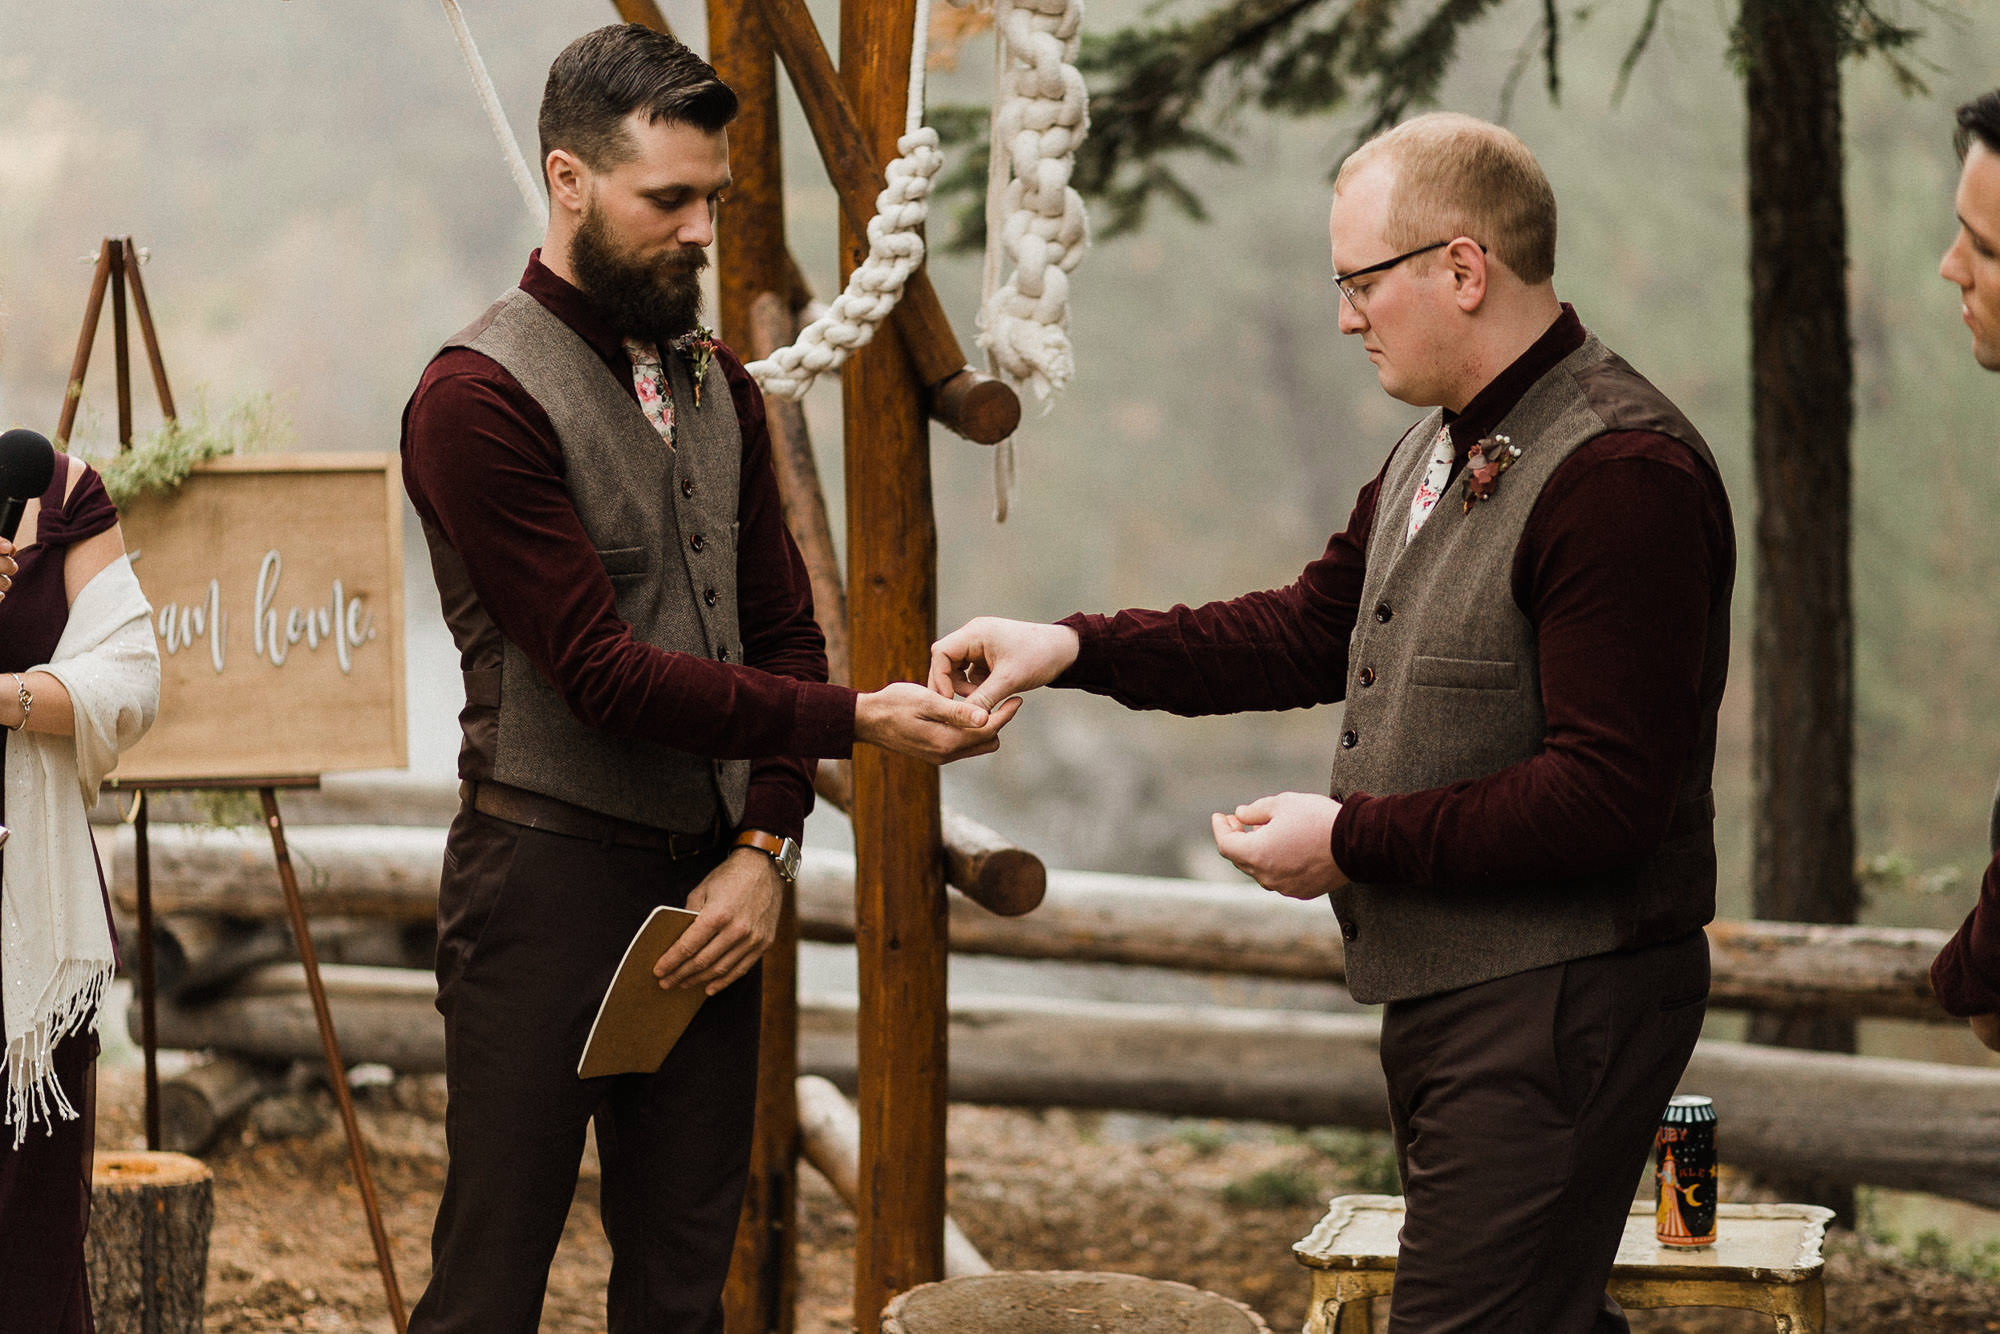 Best man hands groom a ring during ceremony at Skyliner Lodge